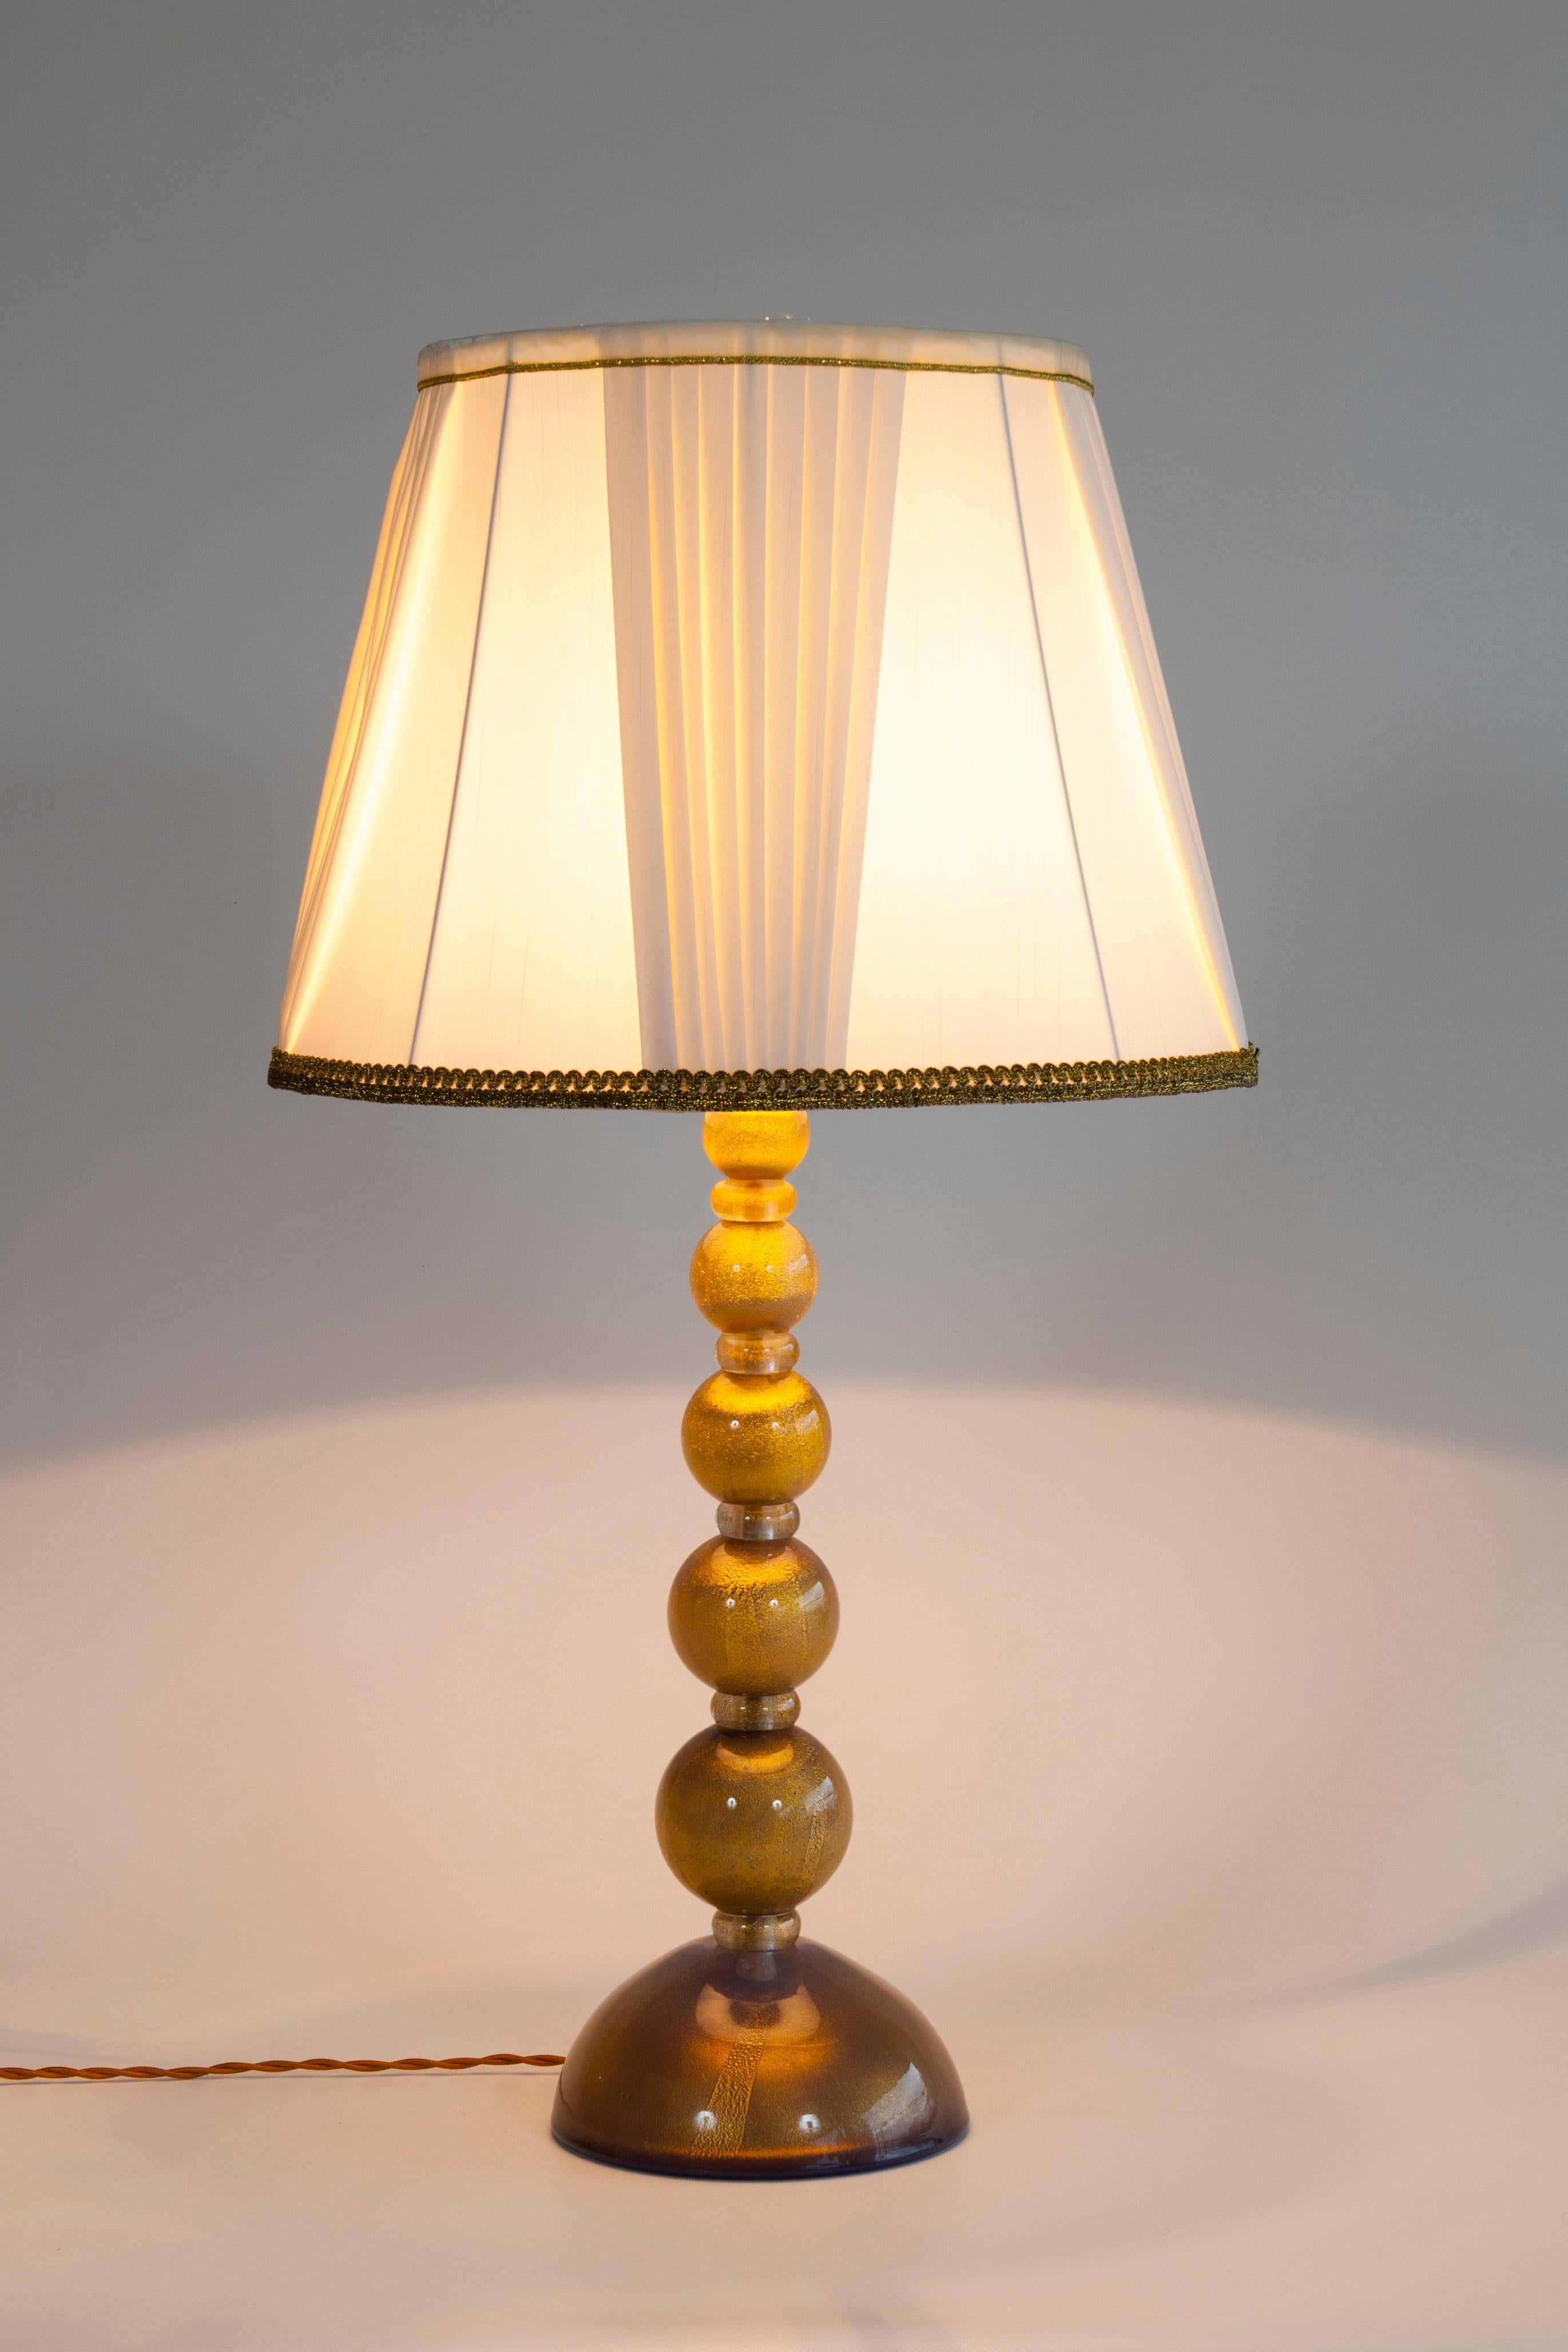 A Pair of Table Lamps Murano Glass Purple and Strong Gold Accents Italy 2000s For Sale 1